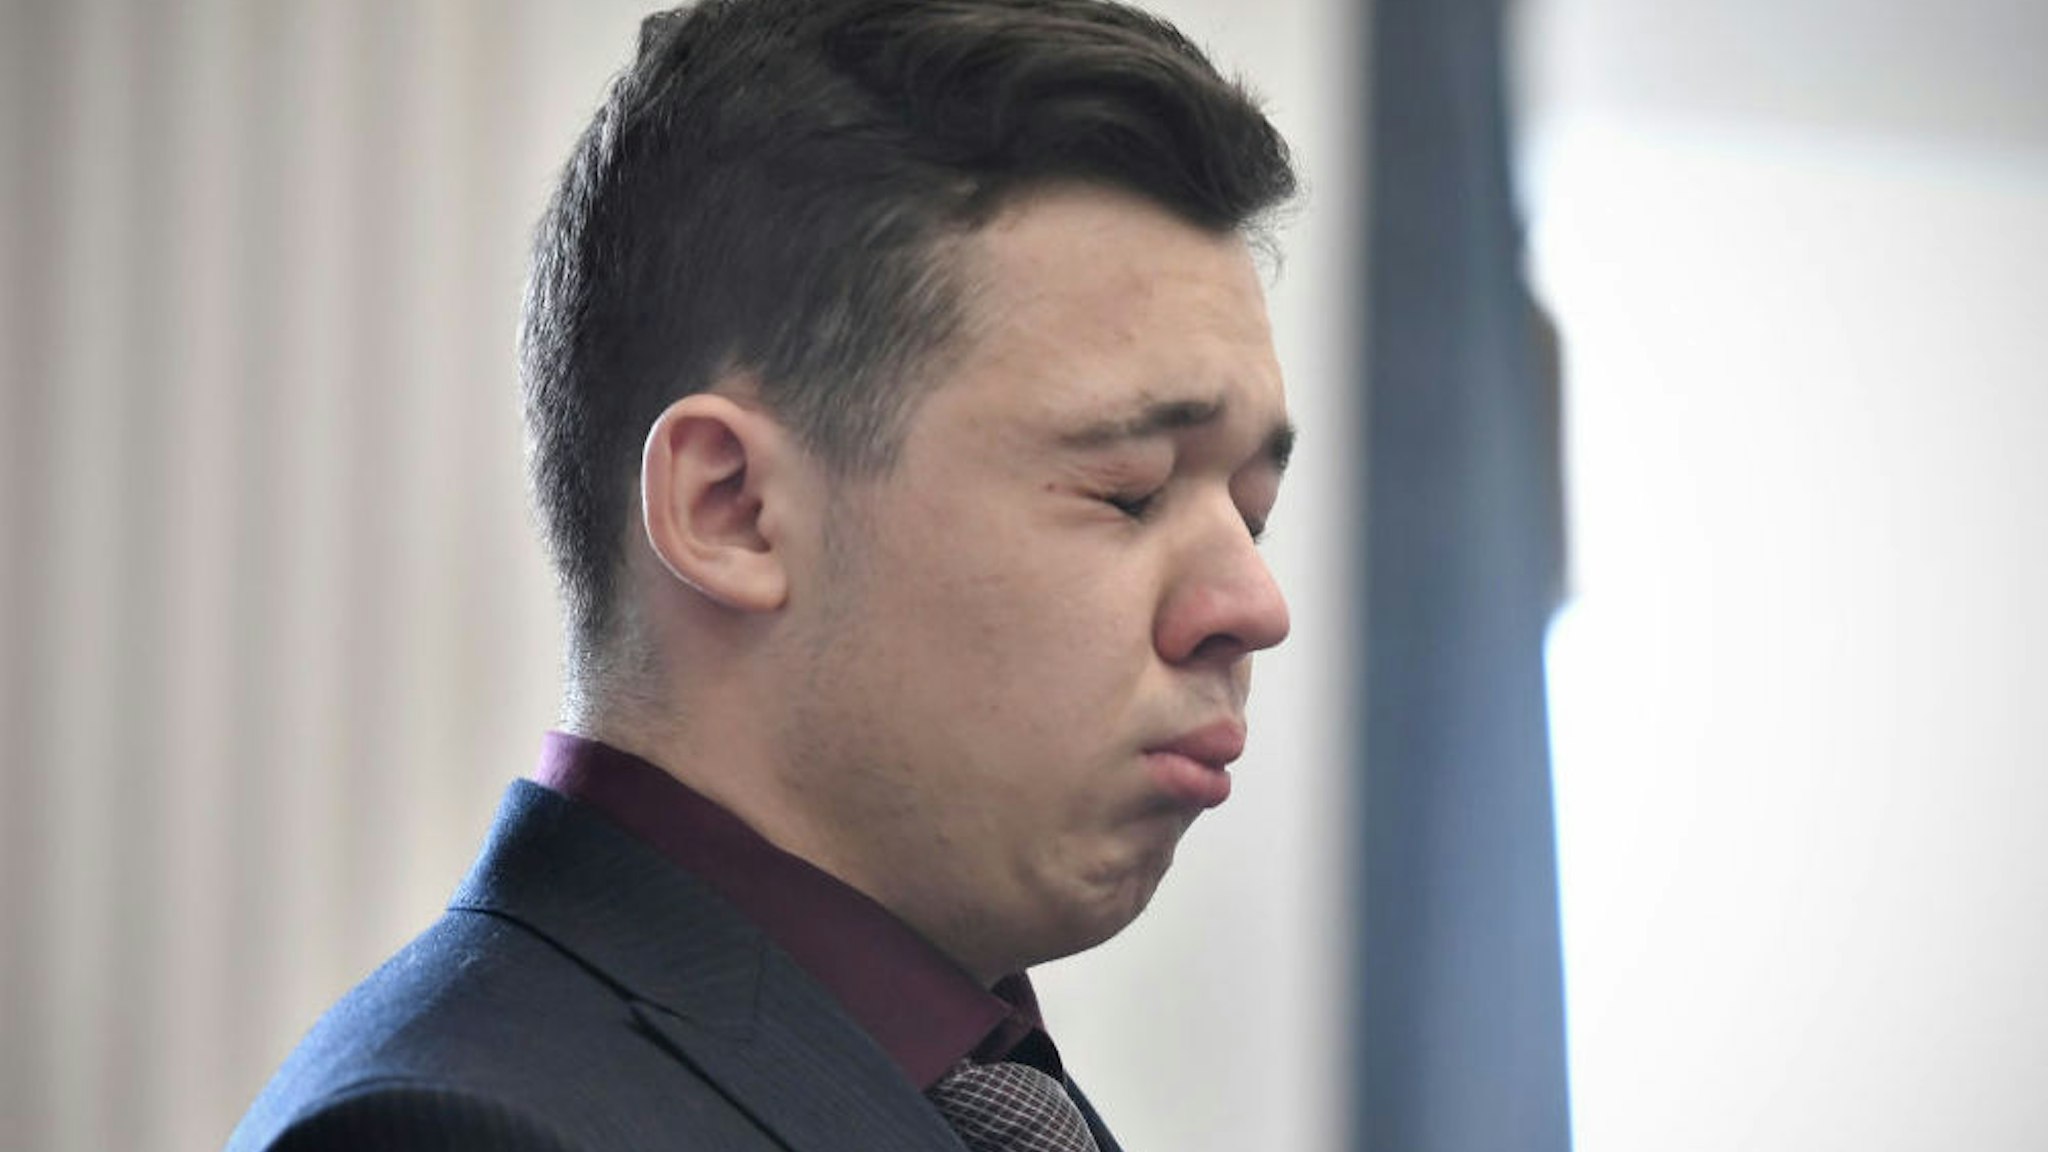 Kyle Rittenhouse closes his eyes and cries as he is found not guilty on all counts at the Kenosha County Courthouse on November 19, 2021 in Kenosha, Wisconsin.